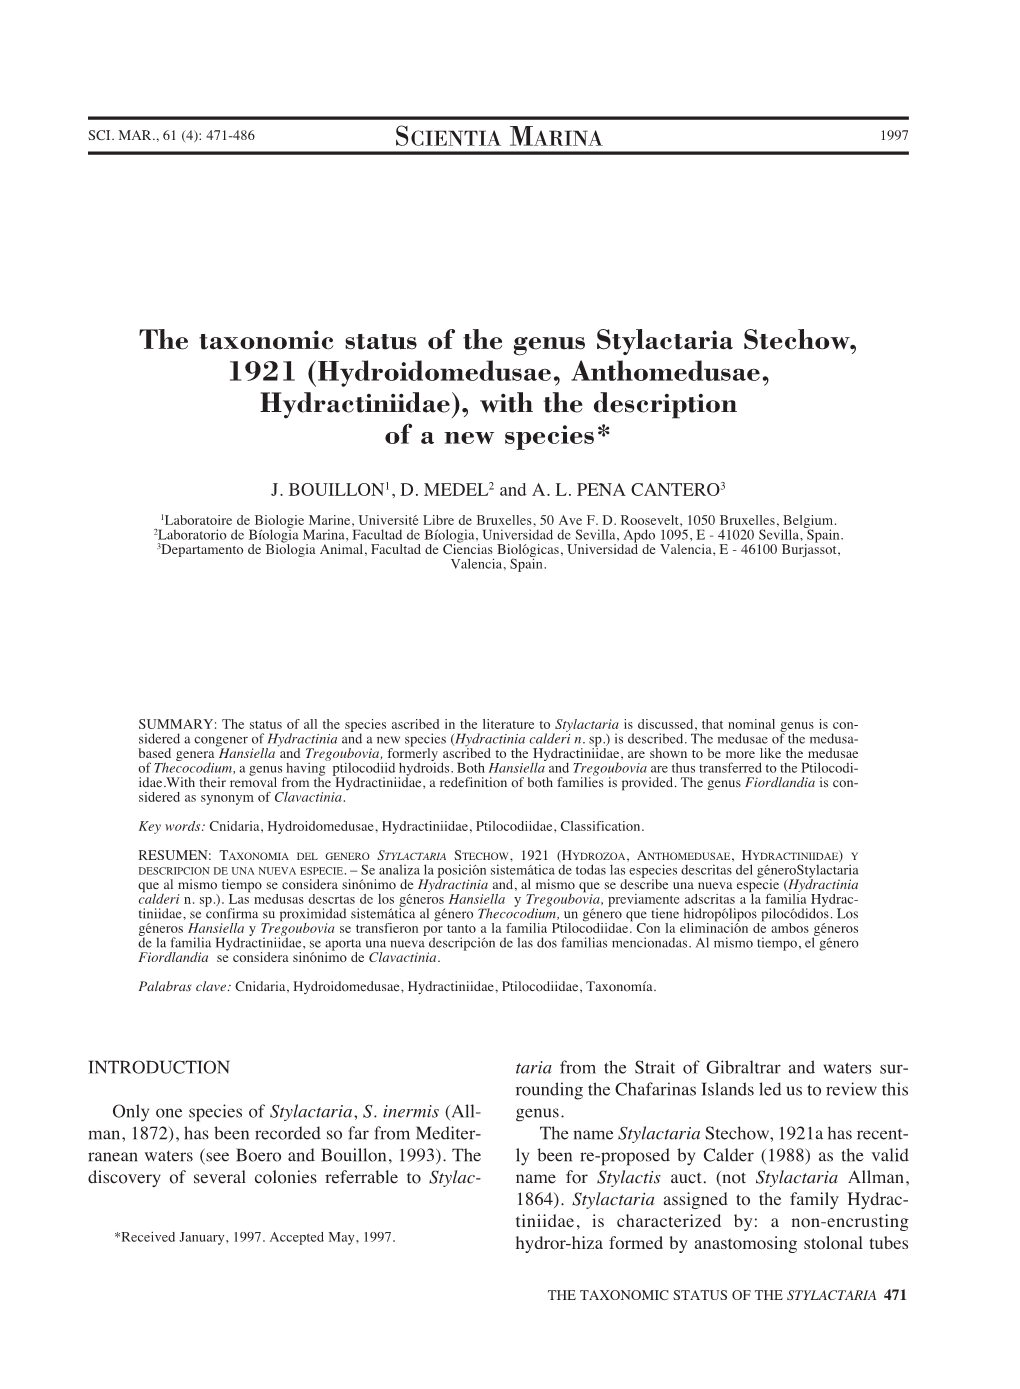 The Taxonomic Status of the Genus Stylactaria Stechow, 1921 (Hydroidomedusae, Anthomedusae, Hydractiniidae), with the Description of a New Species*